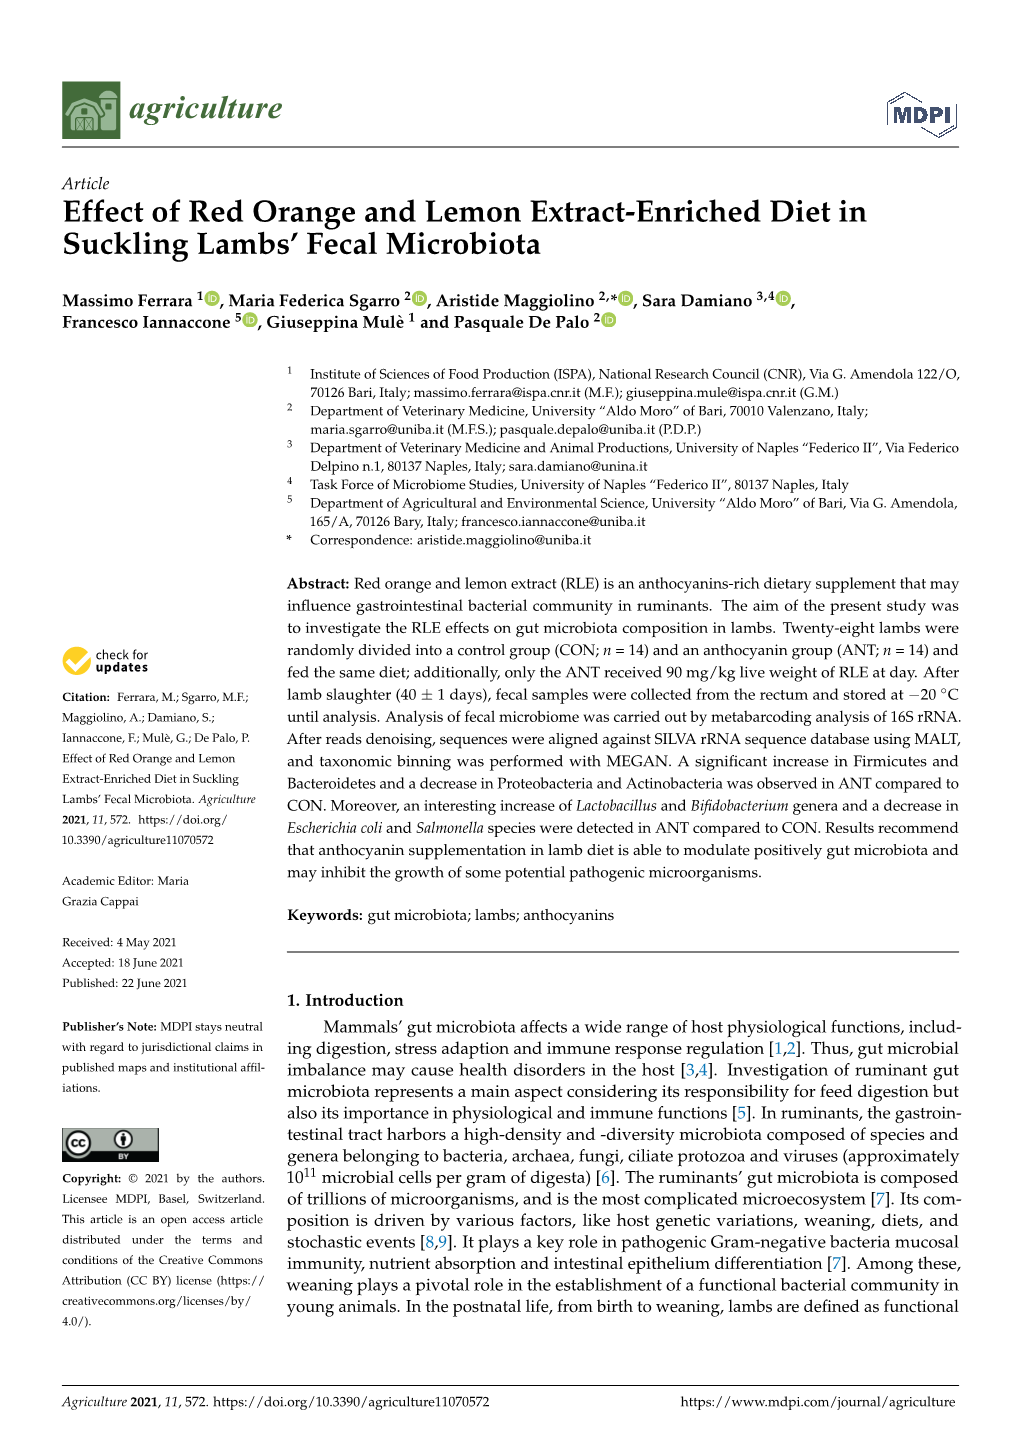 Effect of Red Orange and Lemon Extract-Enriched Diet in Suckling Lambs’ Fecal Microbiota